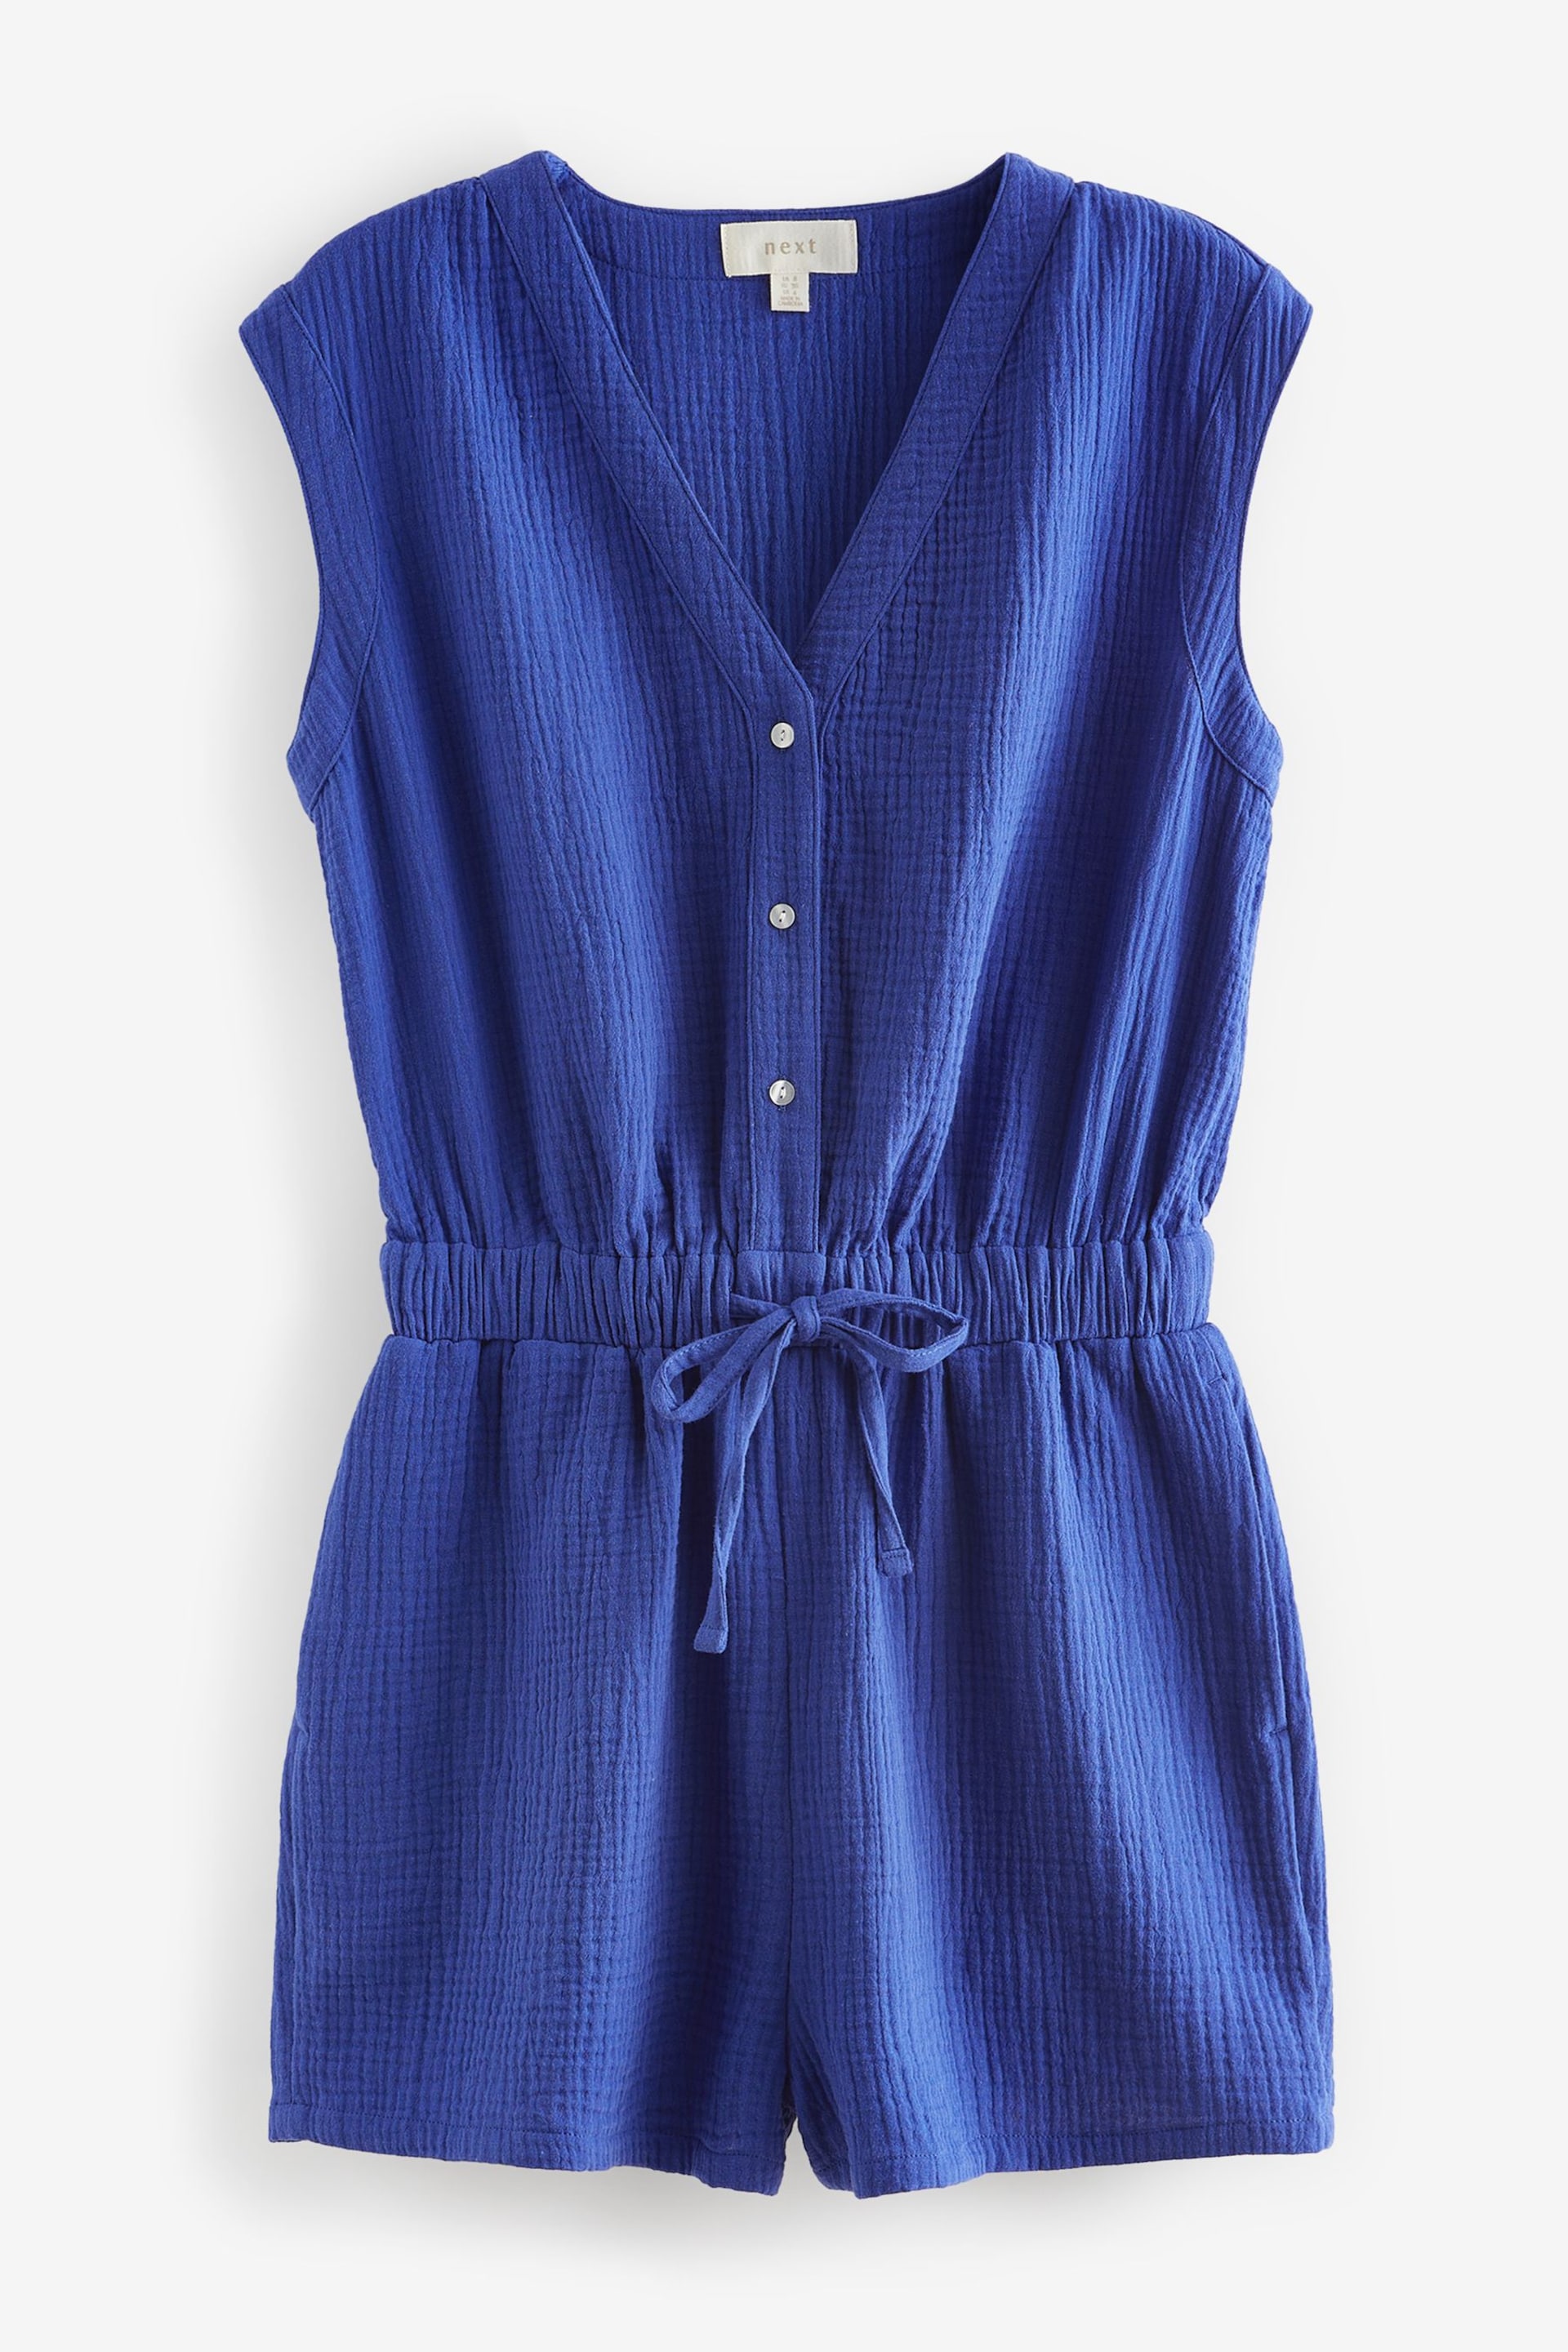 Blue Textured Summer Playsuit - Image 4 of 5